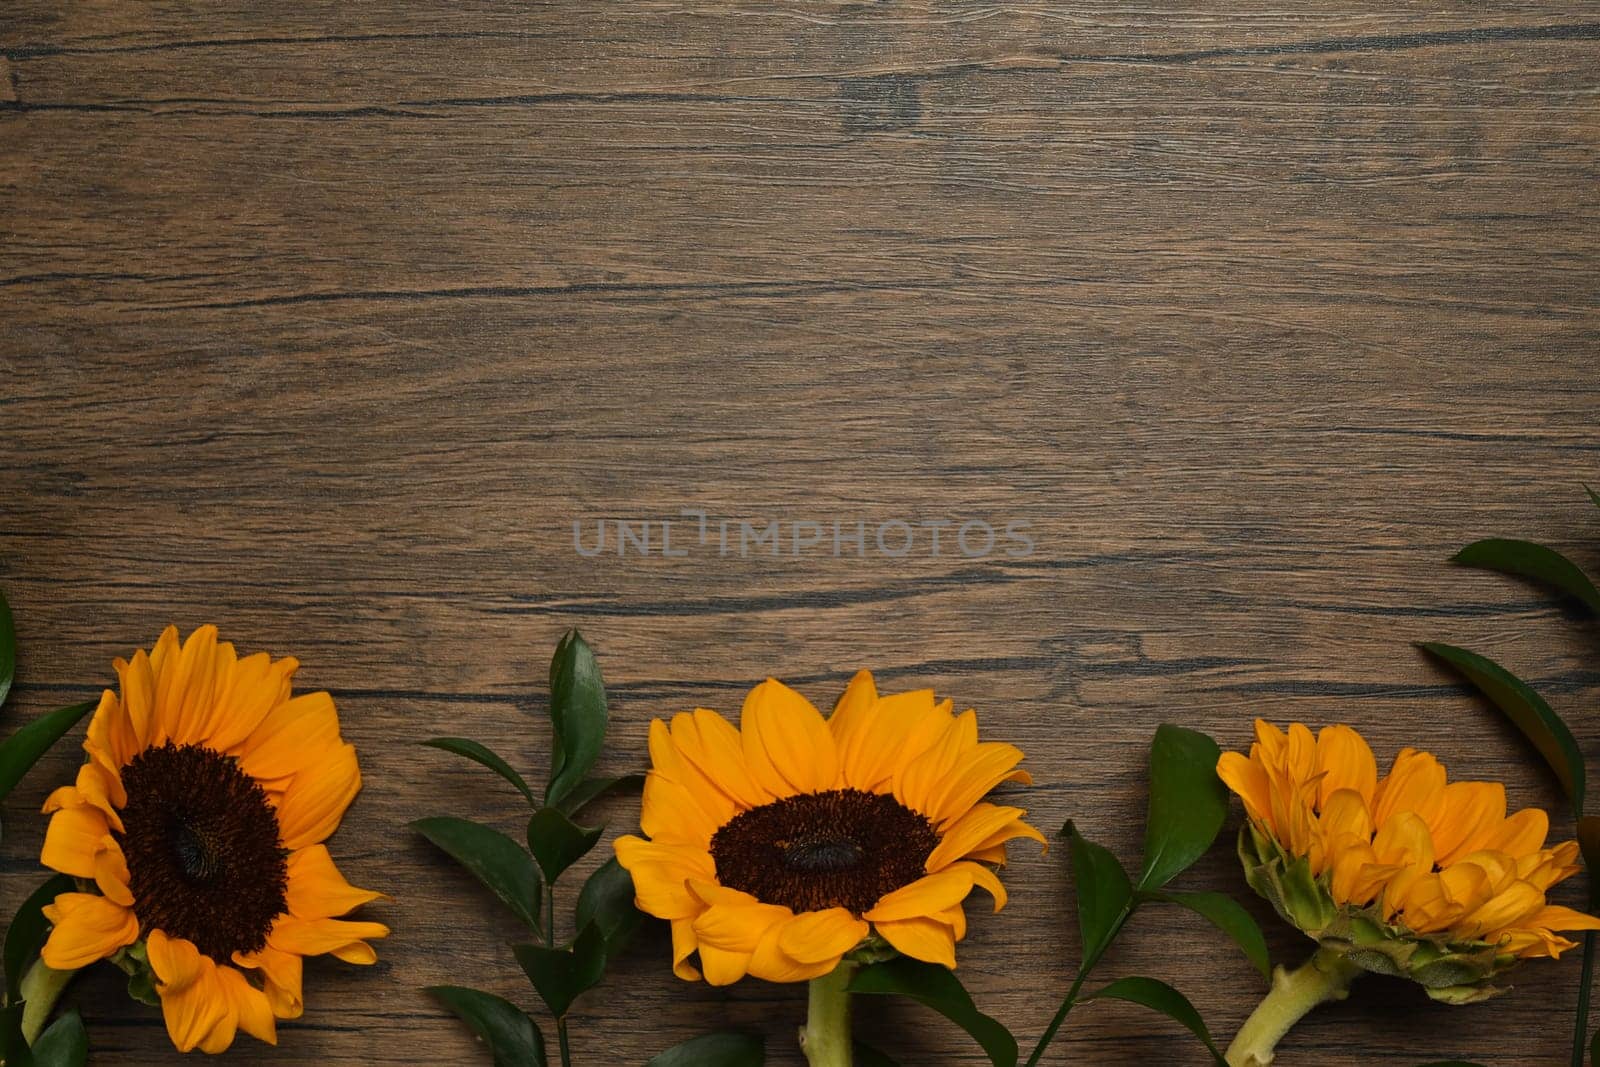 Beautiful sunflowers on rustic wooden background. Top view with copy space, floral background.